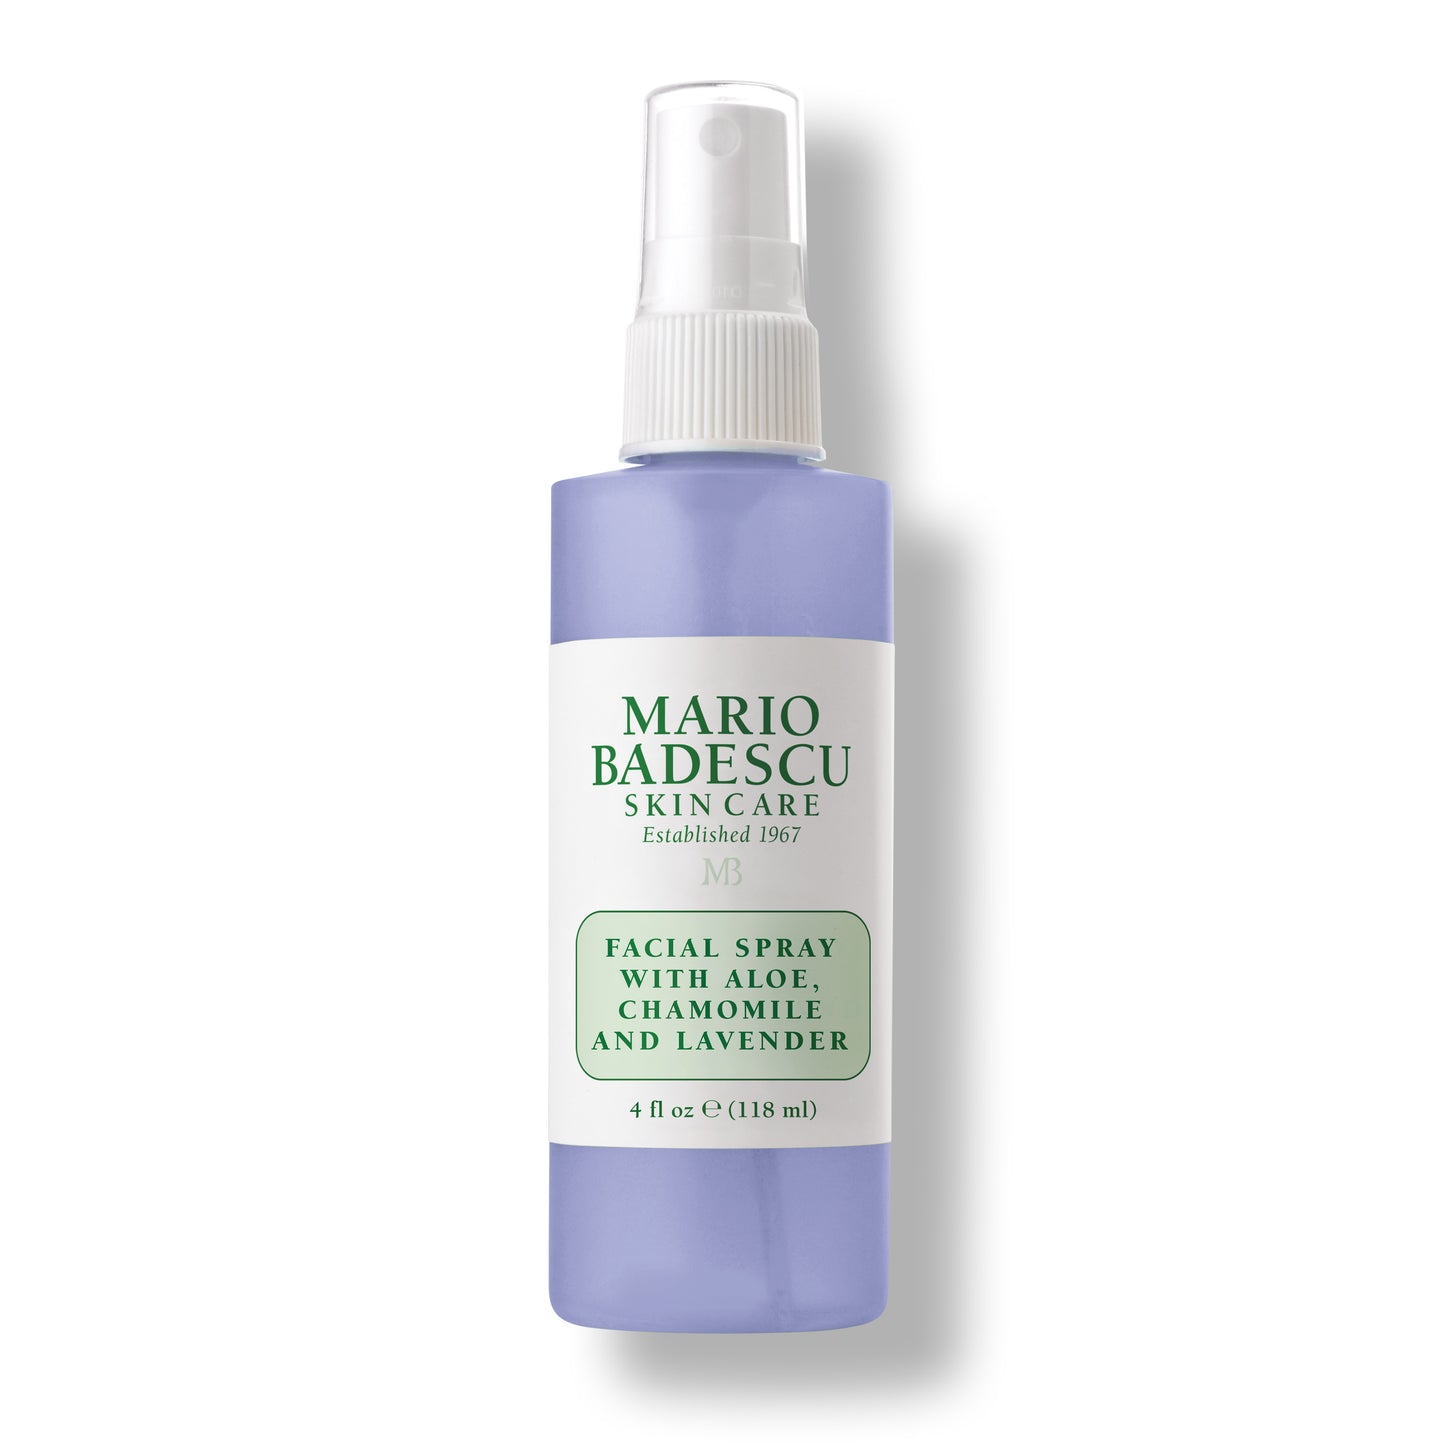 Facial Spray With Aloe, Chamomile and Lavender